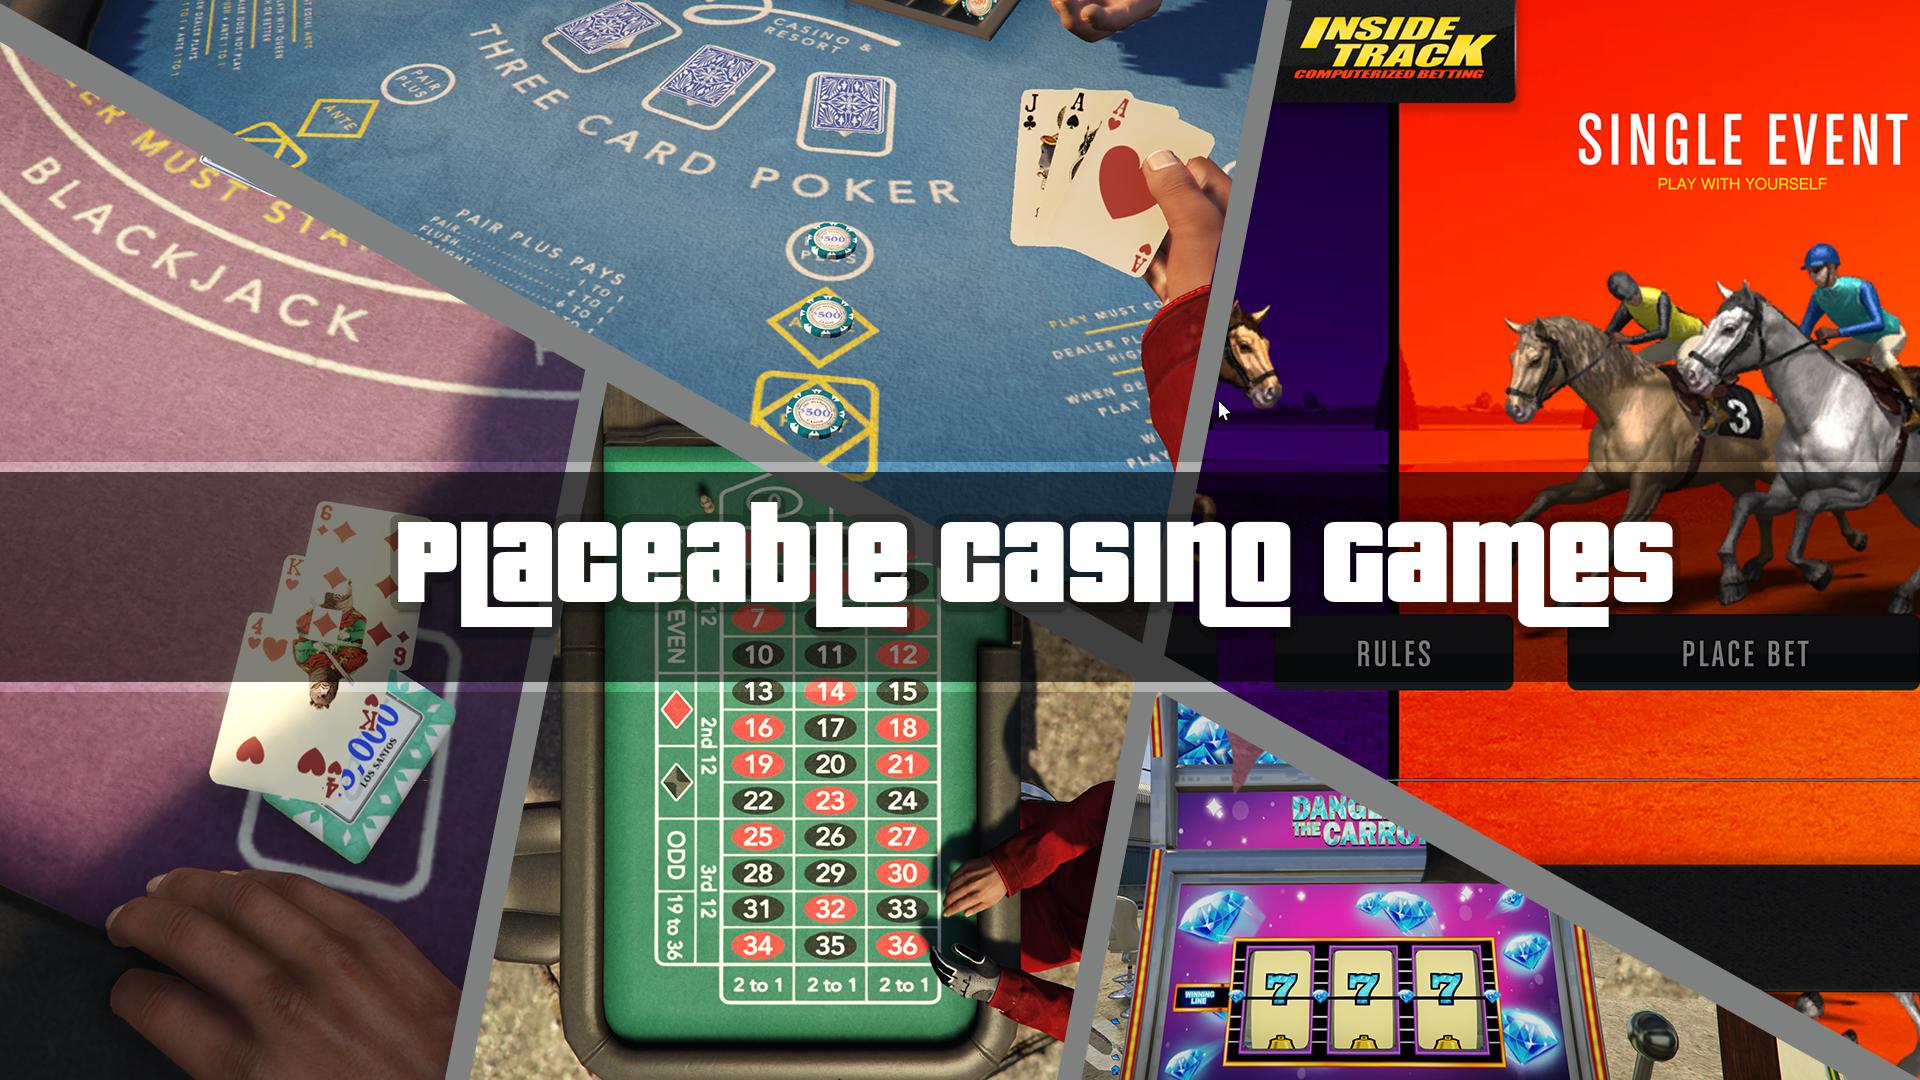 Image 5 - Russian roulette - gambling game - Mod DB